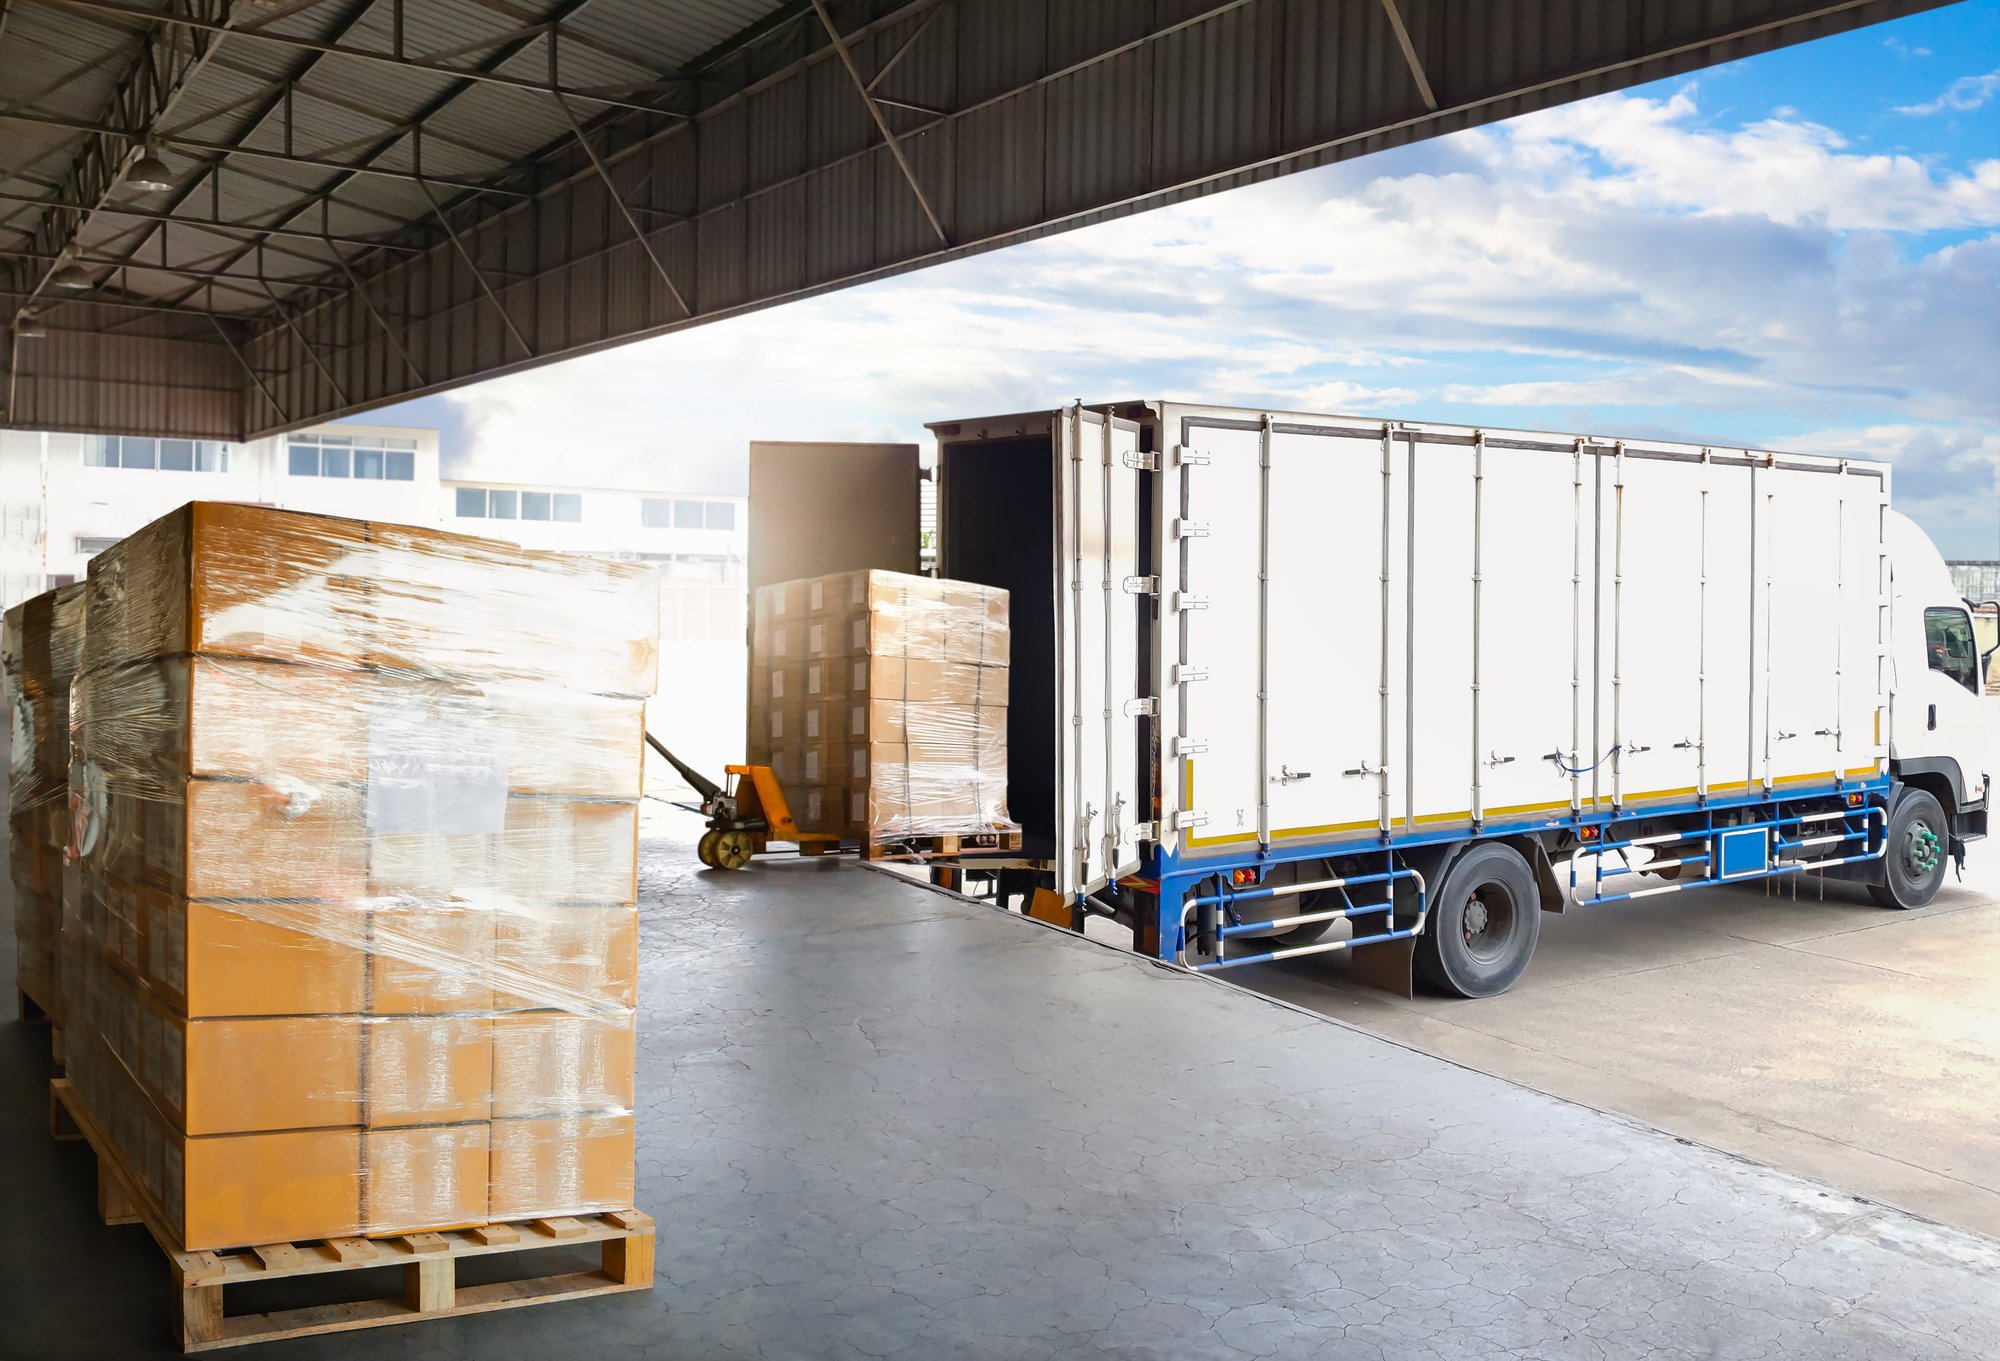 Image of loading a truck for shipment, symbolizing GearTrack's indoor, outdoor, and in-transit tracking capabilities.